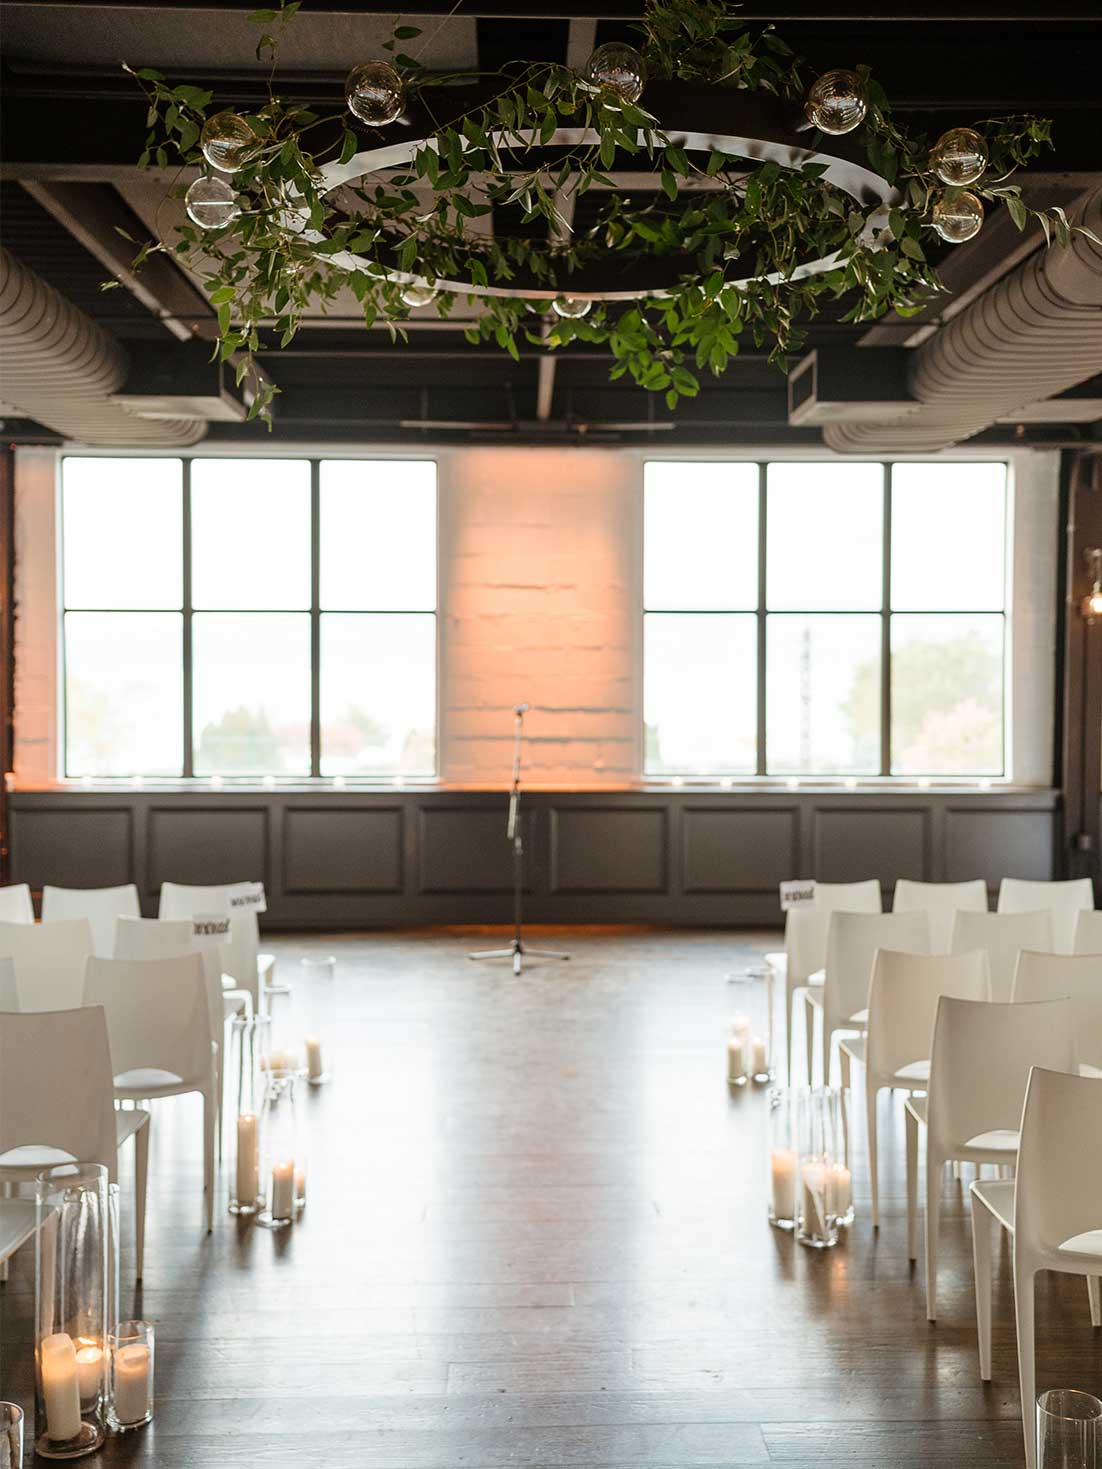 Ceremony set in an industrial loft